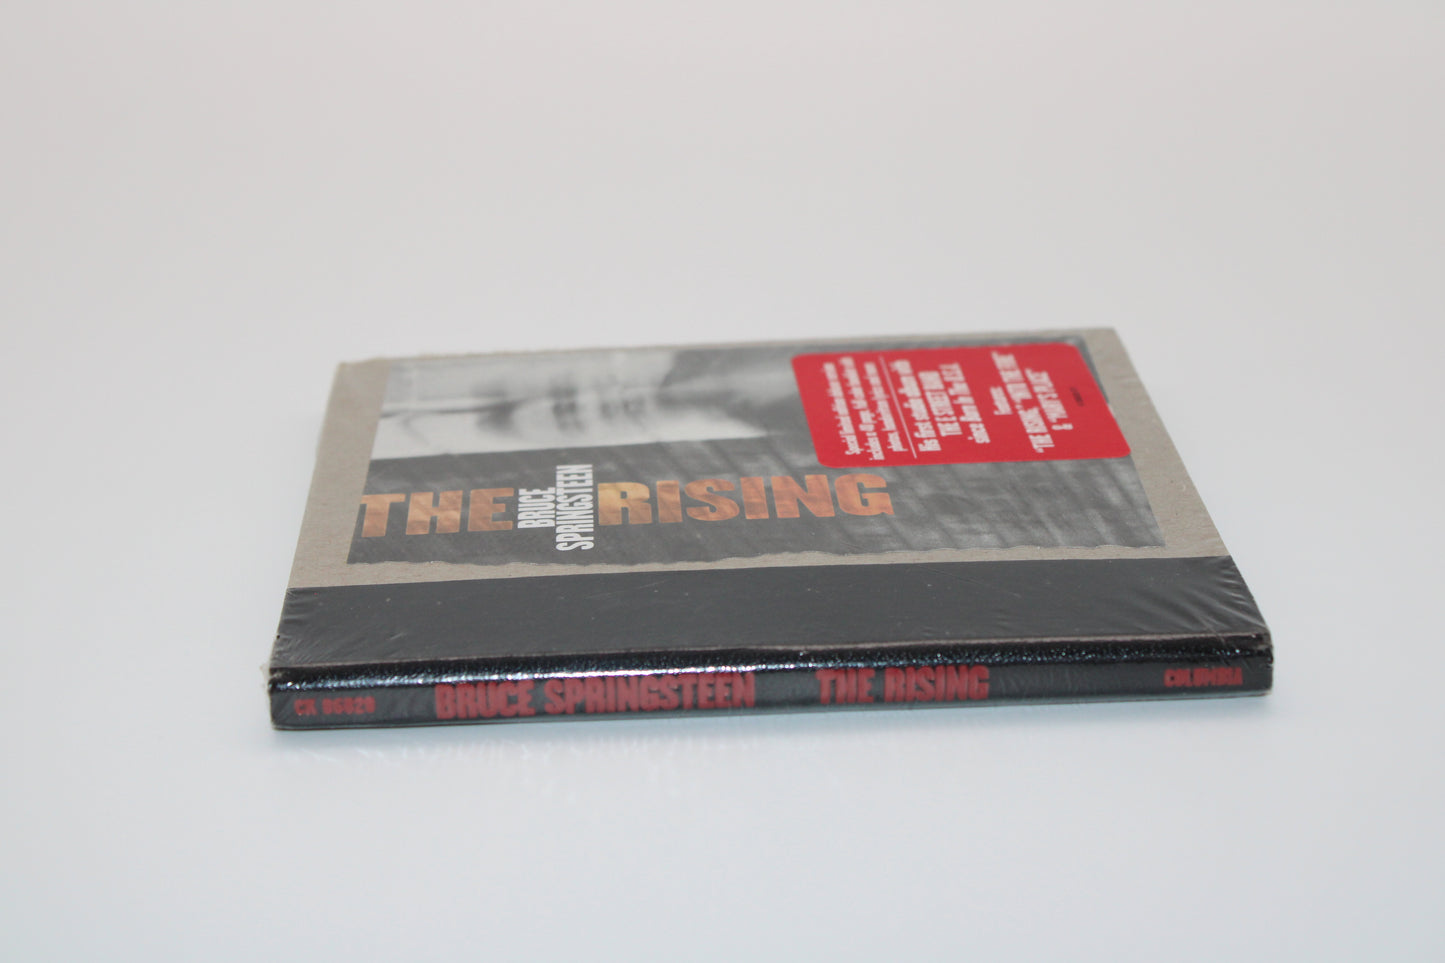 Bruce Springsteen The Rising CD/Sealed Special Edition 40-page Book version Lyric & Pics Collectible